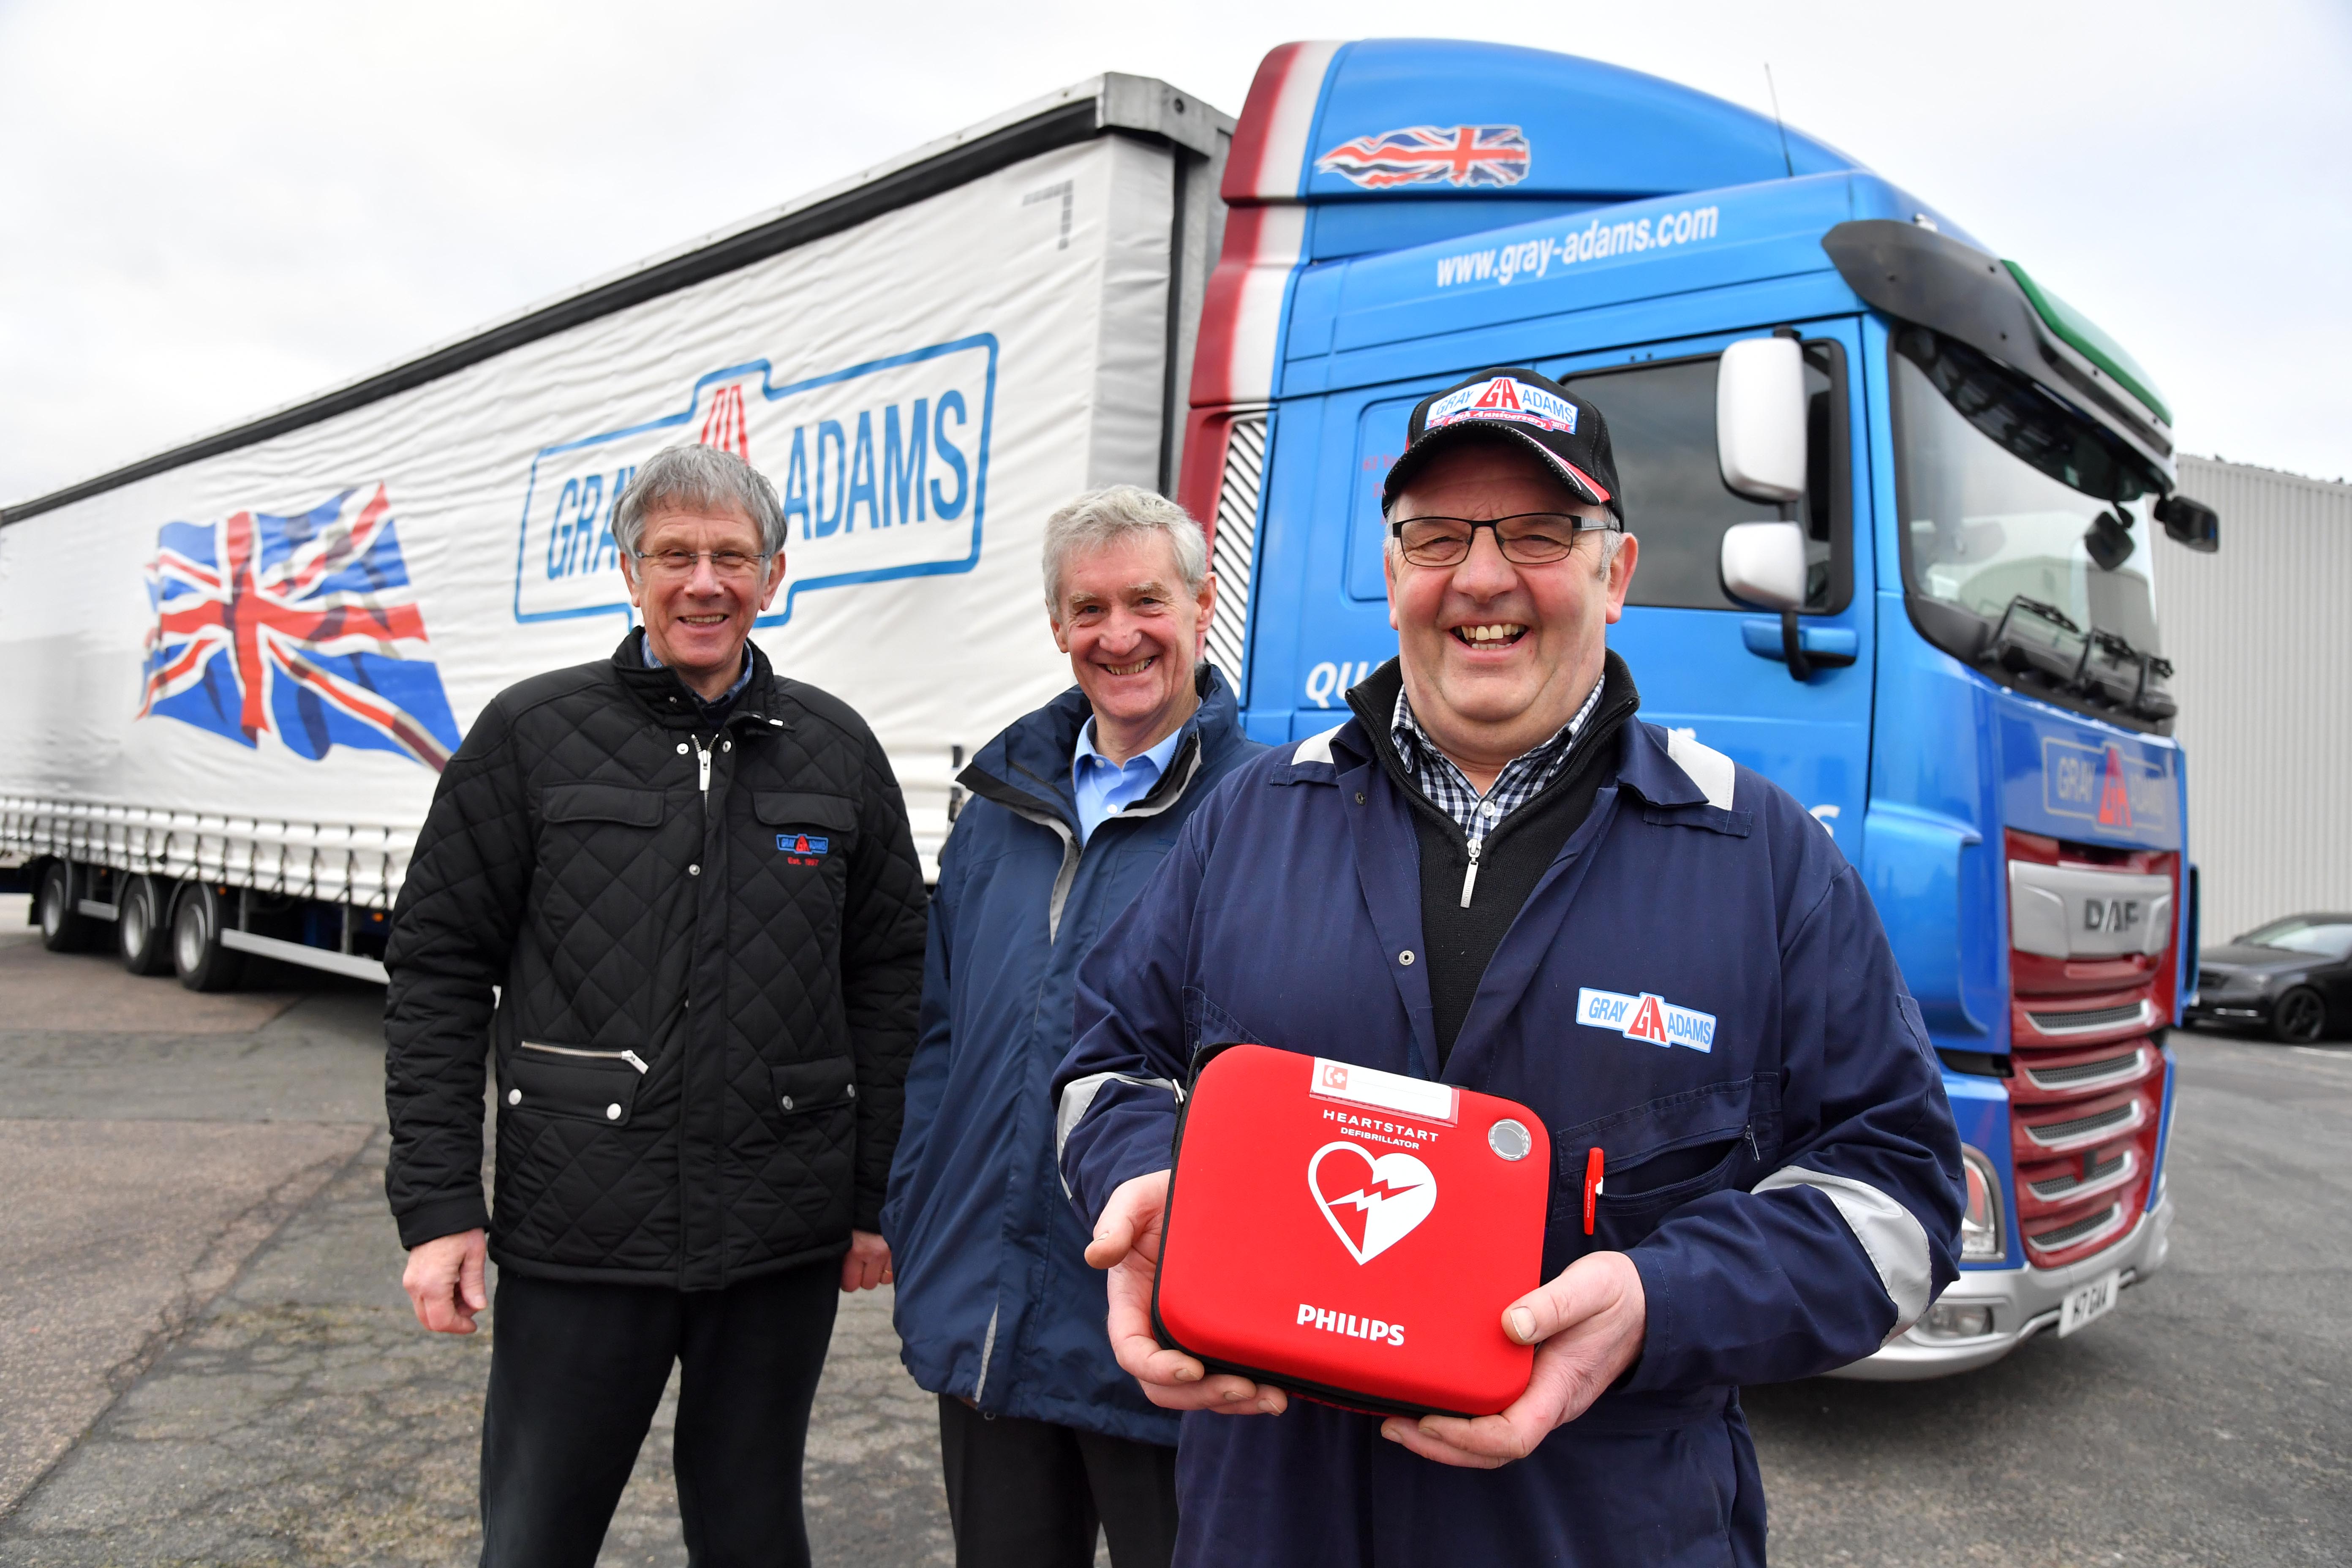 Murray Littlejohn of Gray and Adams shows one of the defibrillators which is being supplied to the company’s tractor units watched by joint managing director James Gray (L) and MSP Peter Chapman